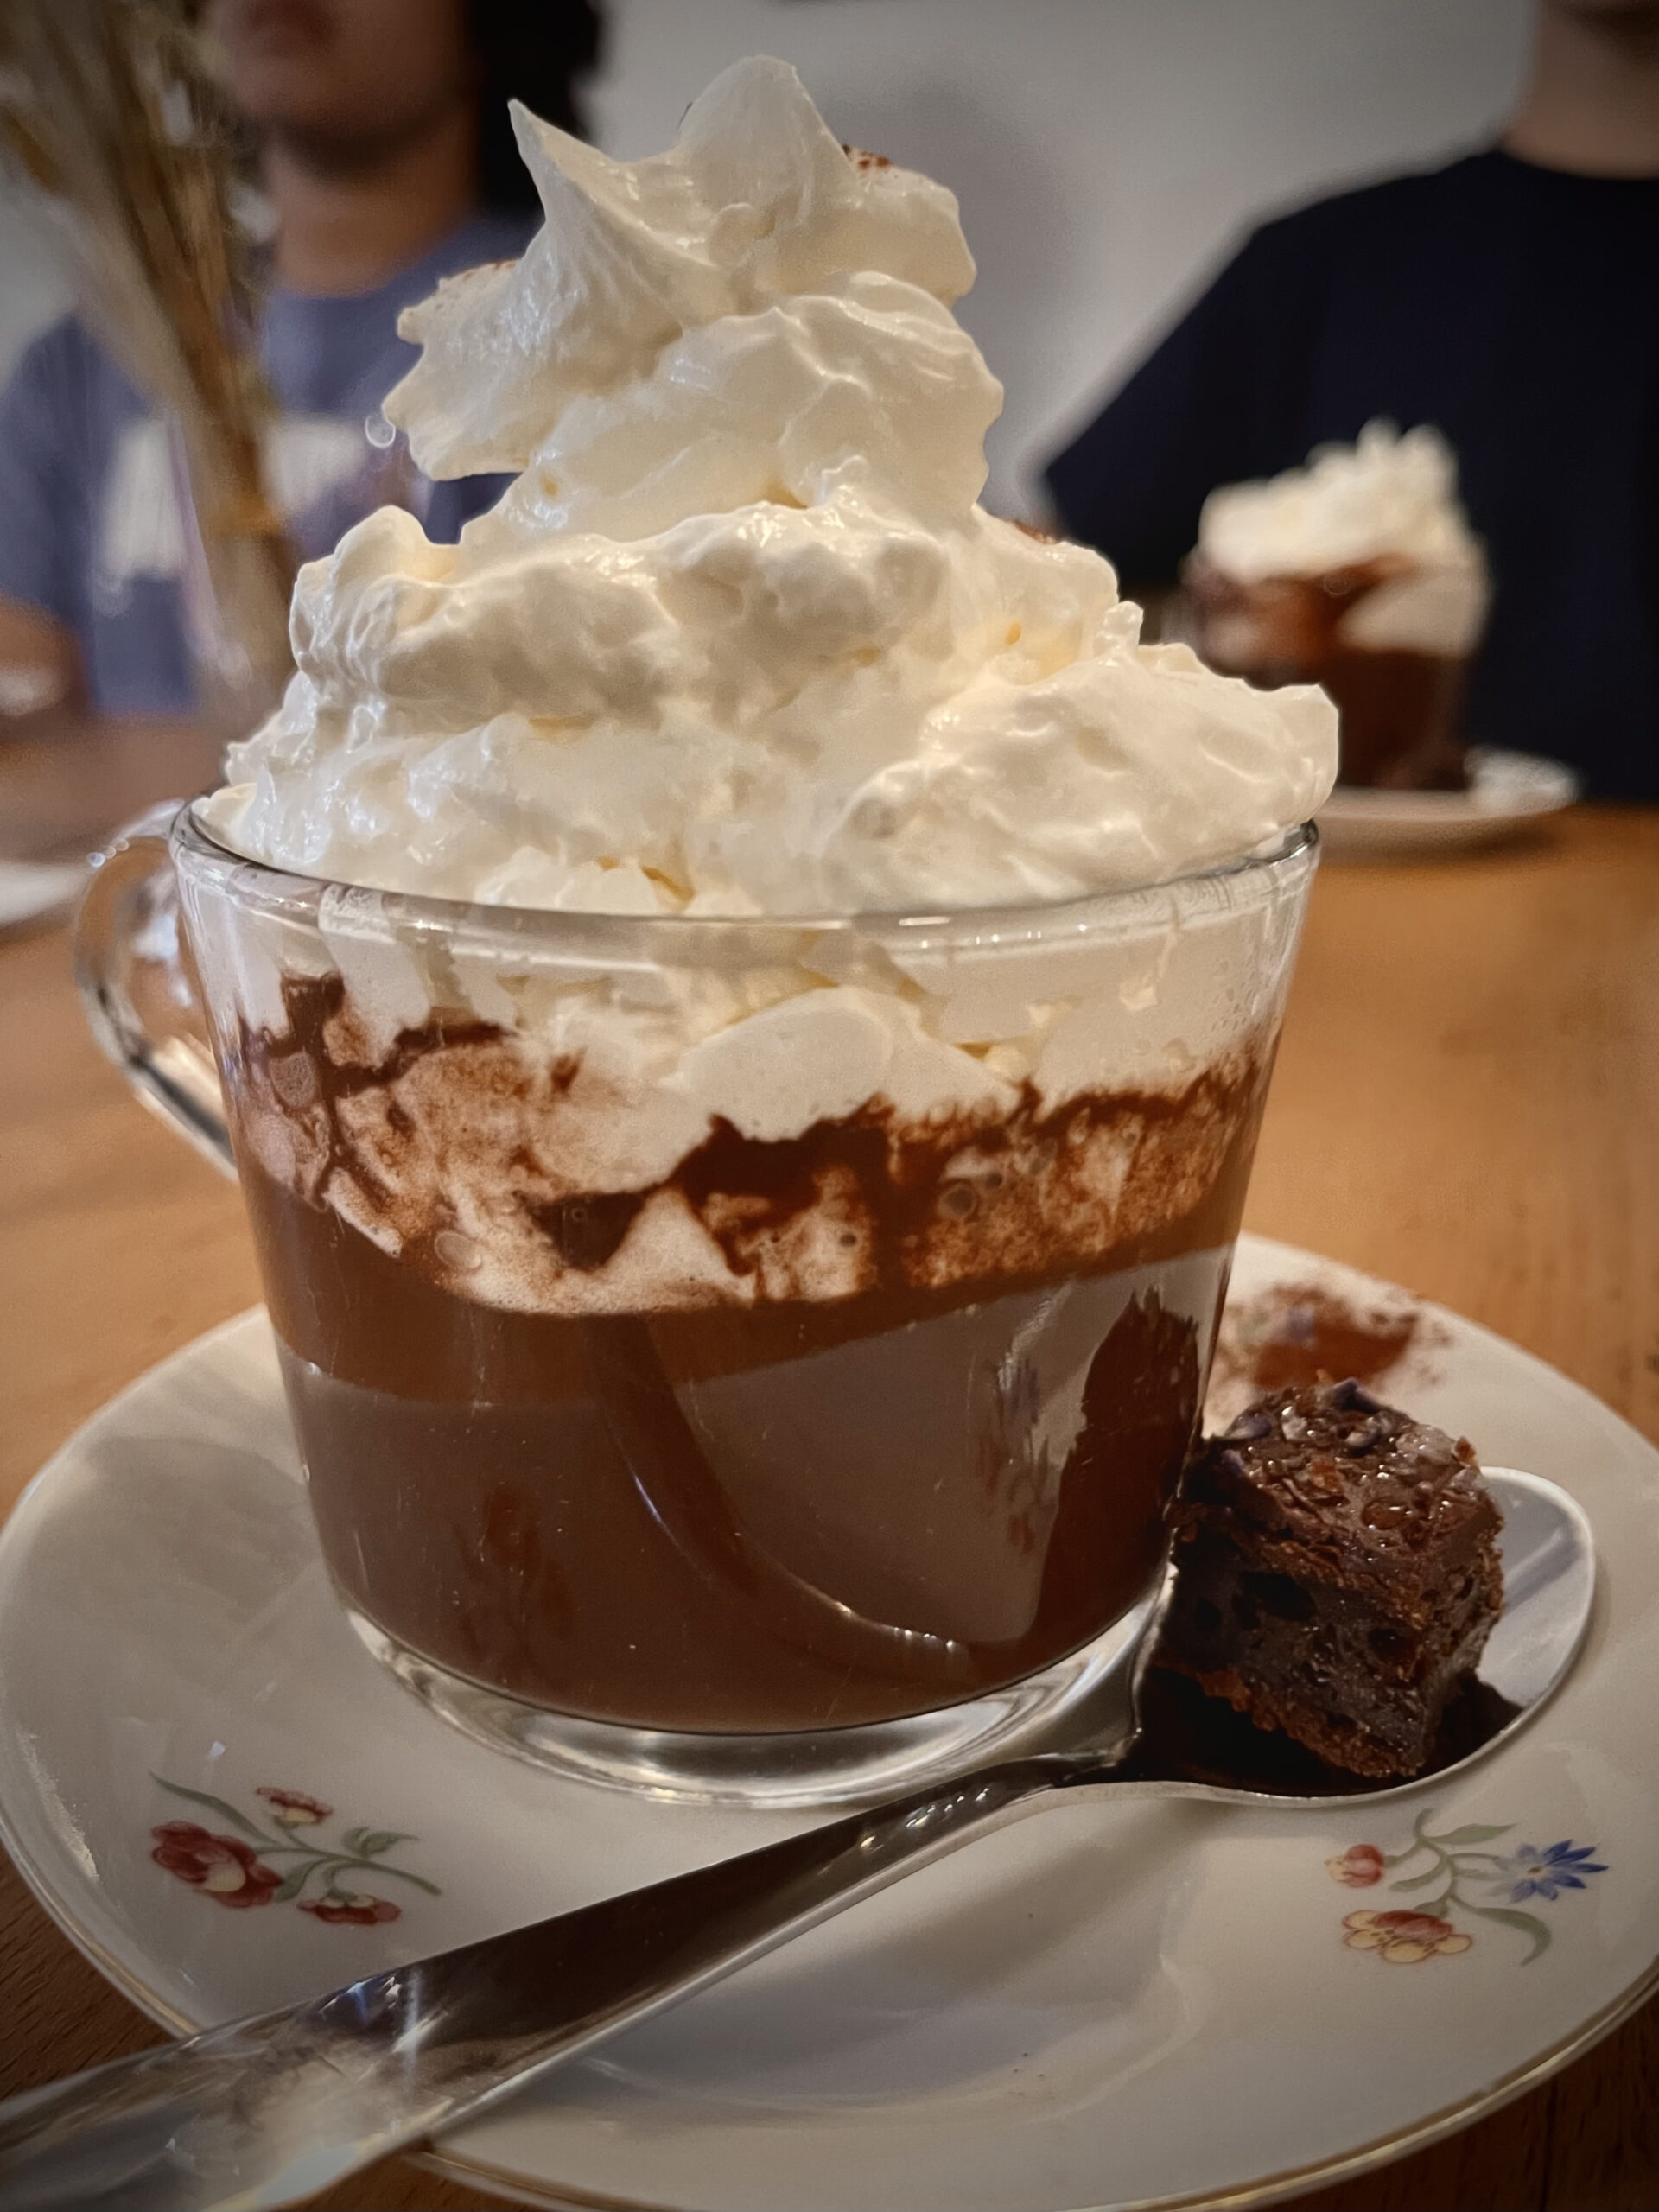 The best hot cocoa you can imagine topped with a huge amount of whipped cream.